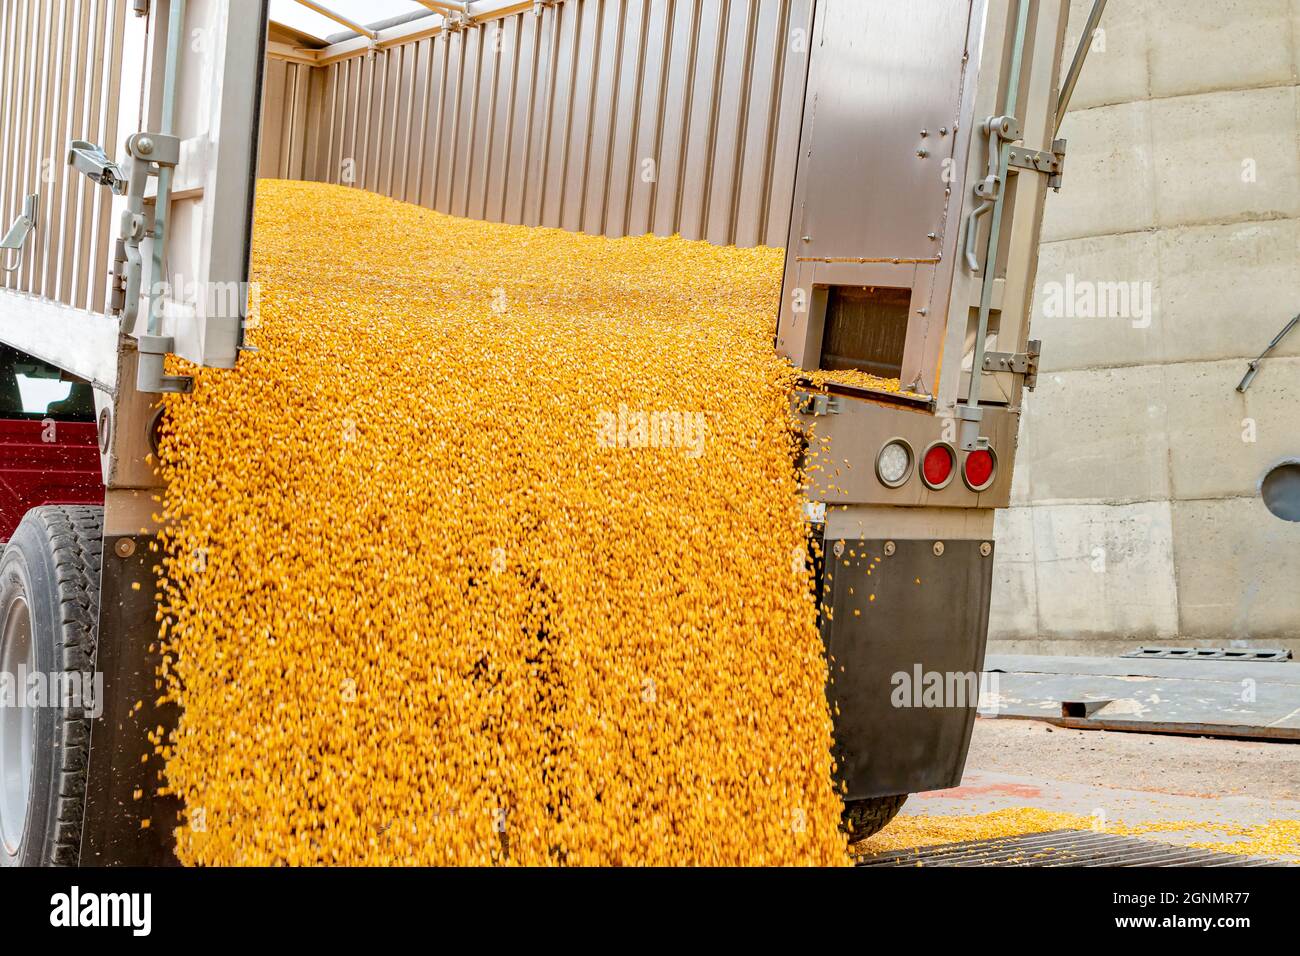 Motion blur of corn unloading from truck at grain elevator. Harvest season, grain storage and commodity market concept. Stock Photo